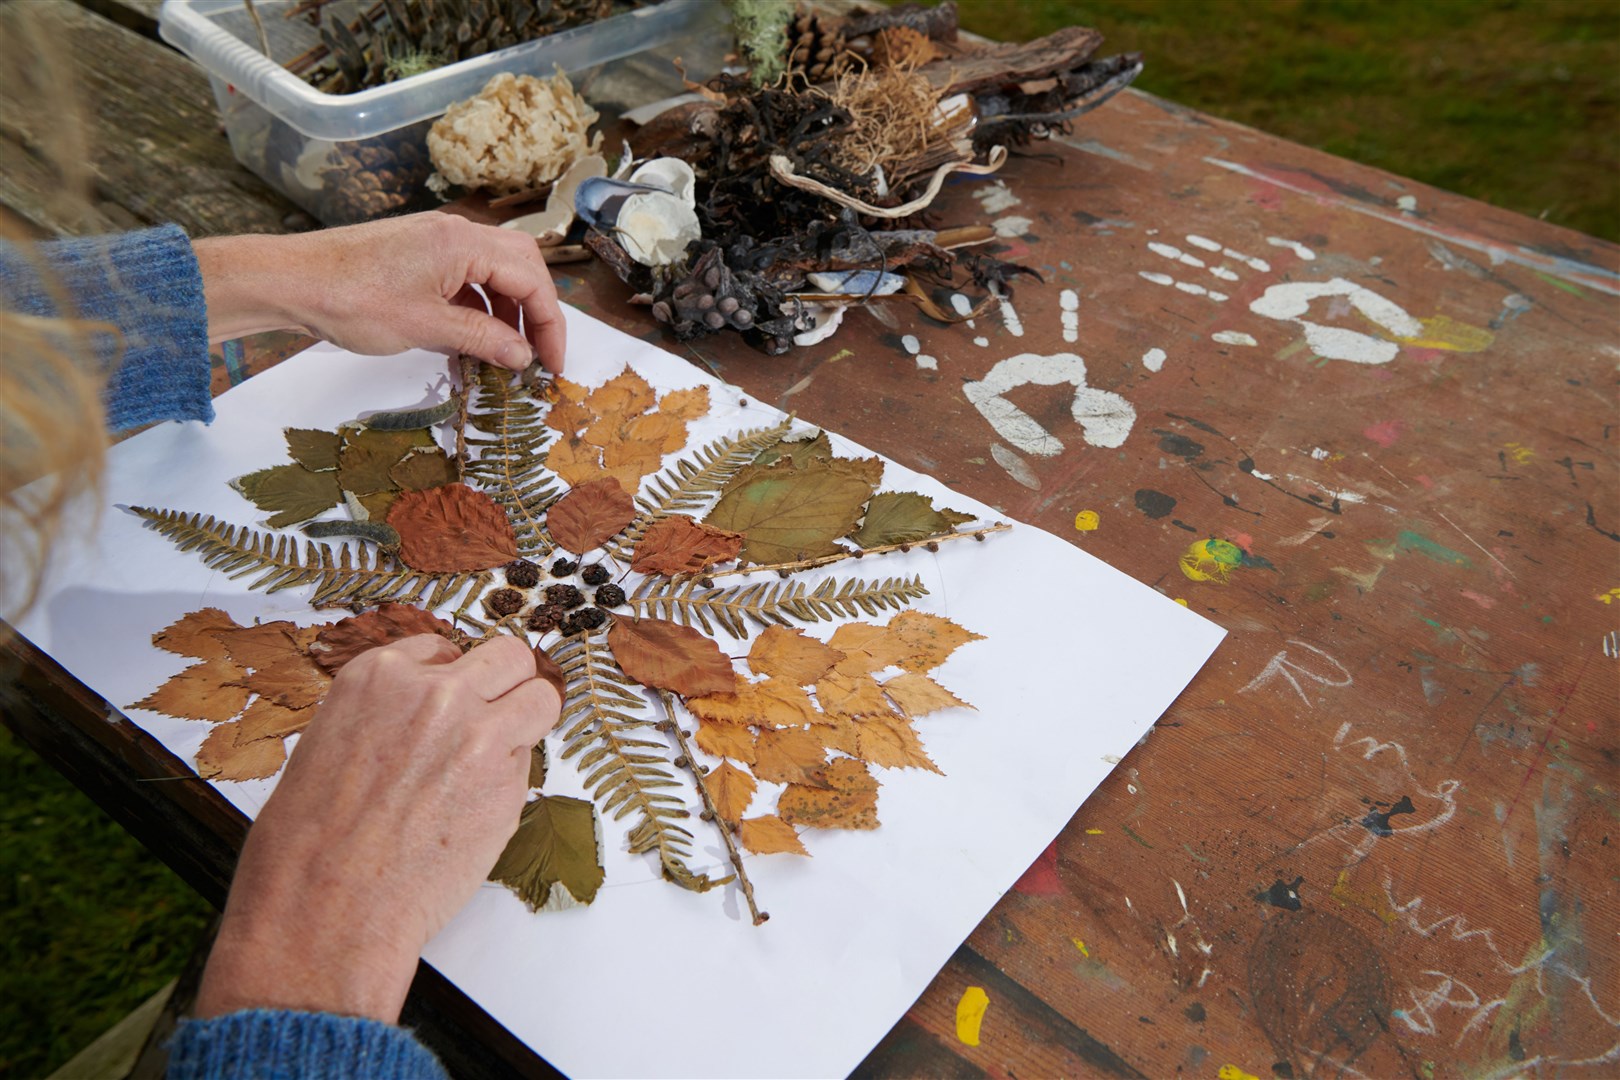 The Art & Nature Connections project, involving Moray carers, will run for 16 months.